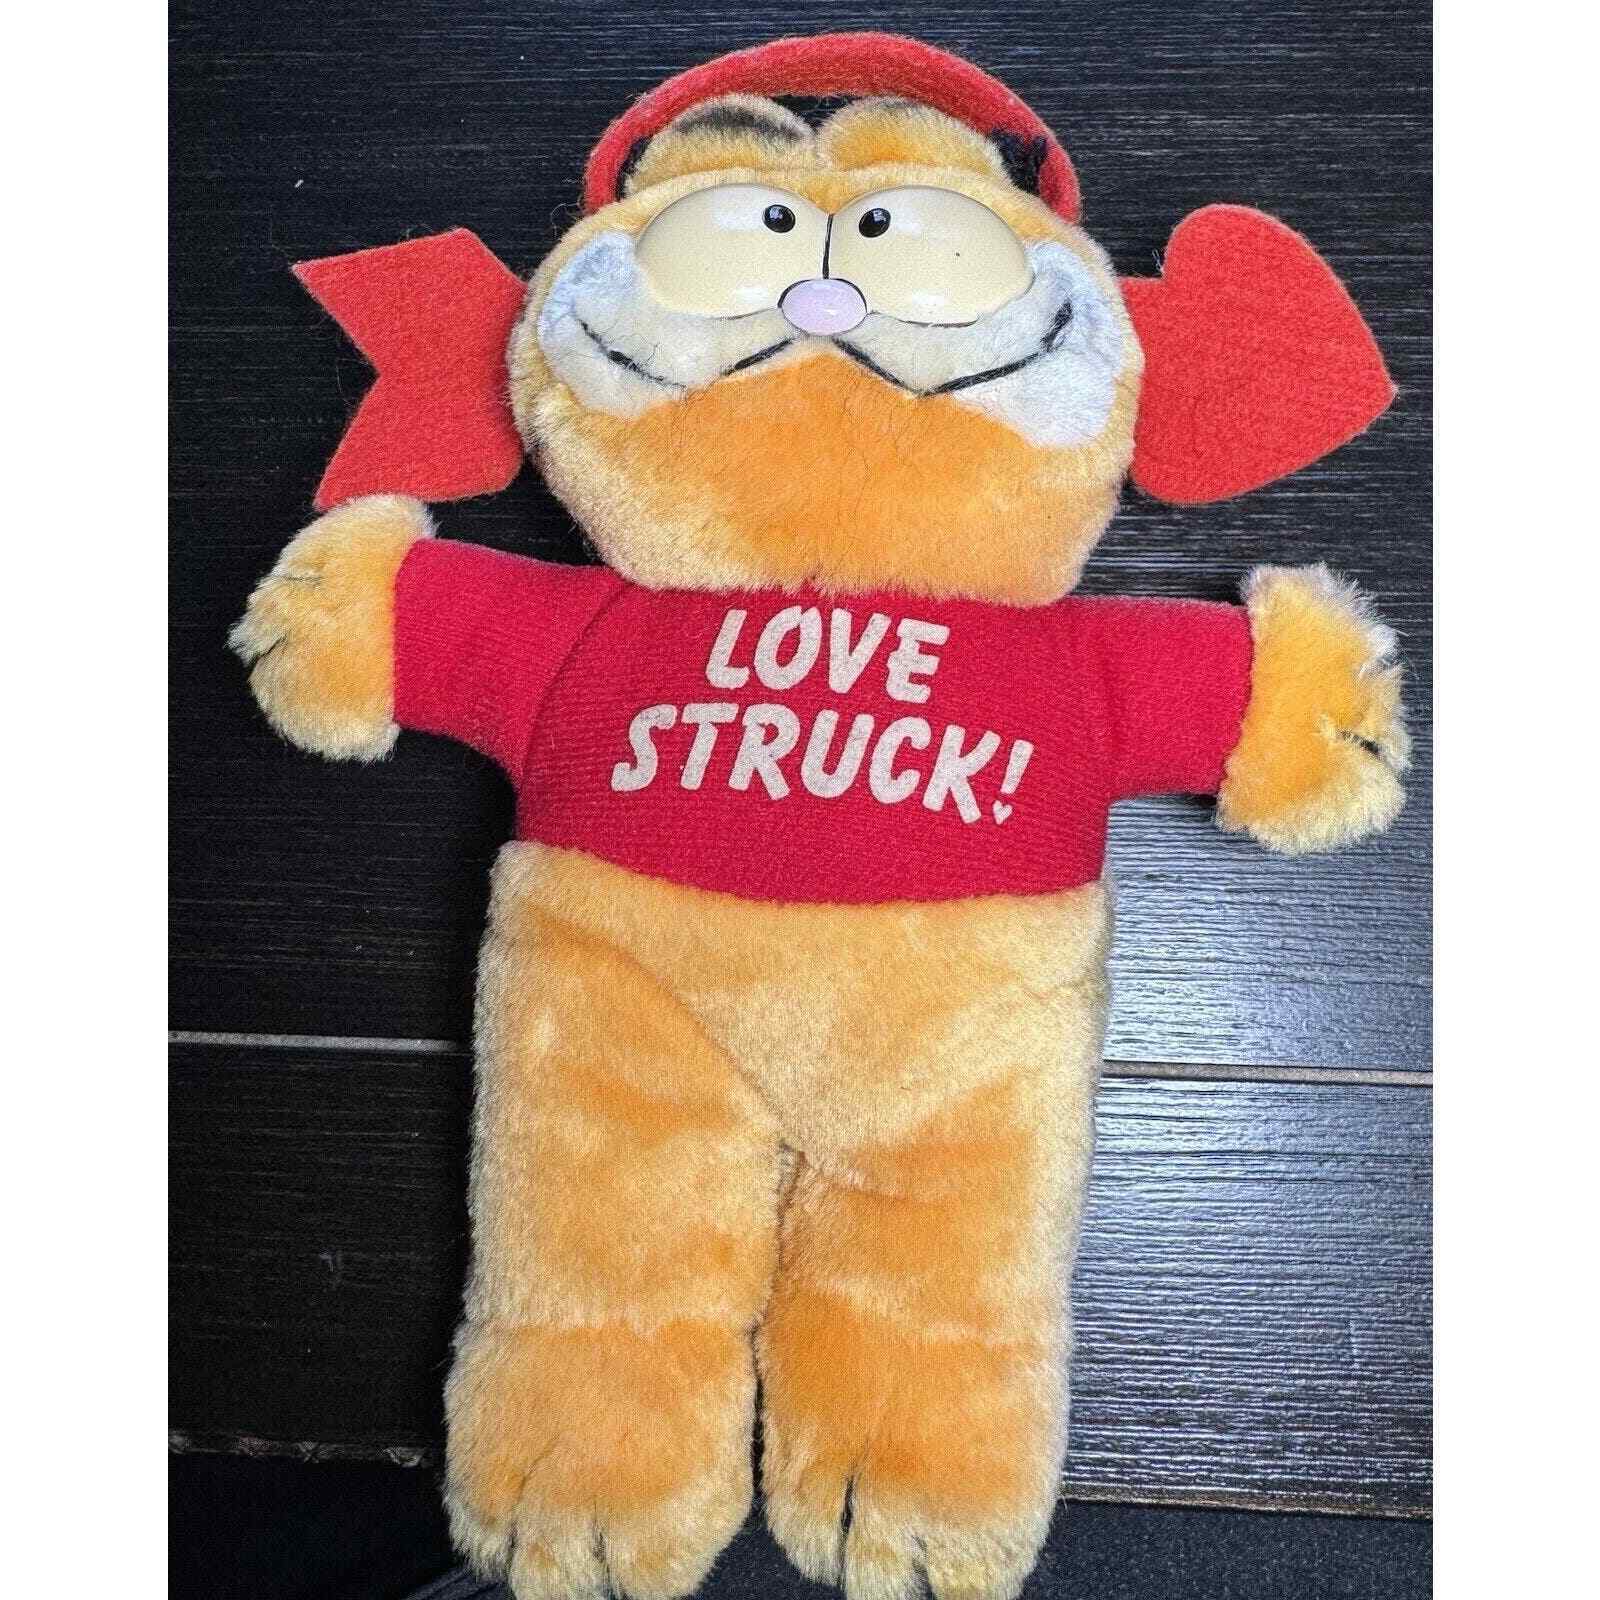 Vintage Garfield Love Struck Window Cling Some Fading